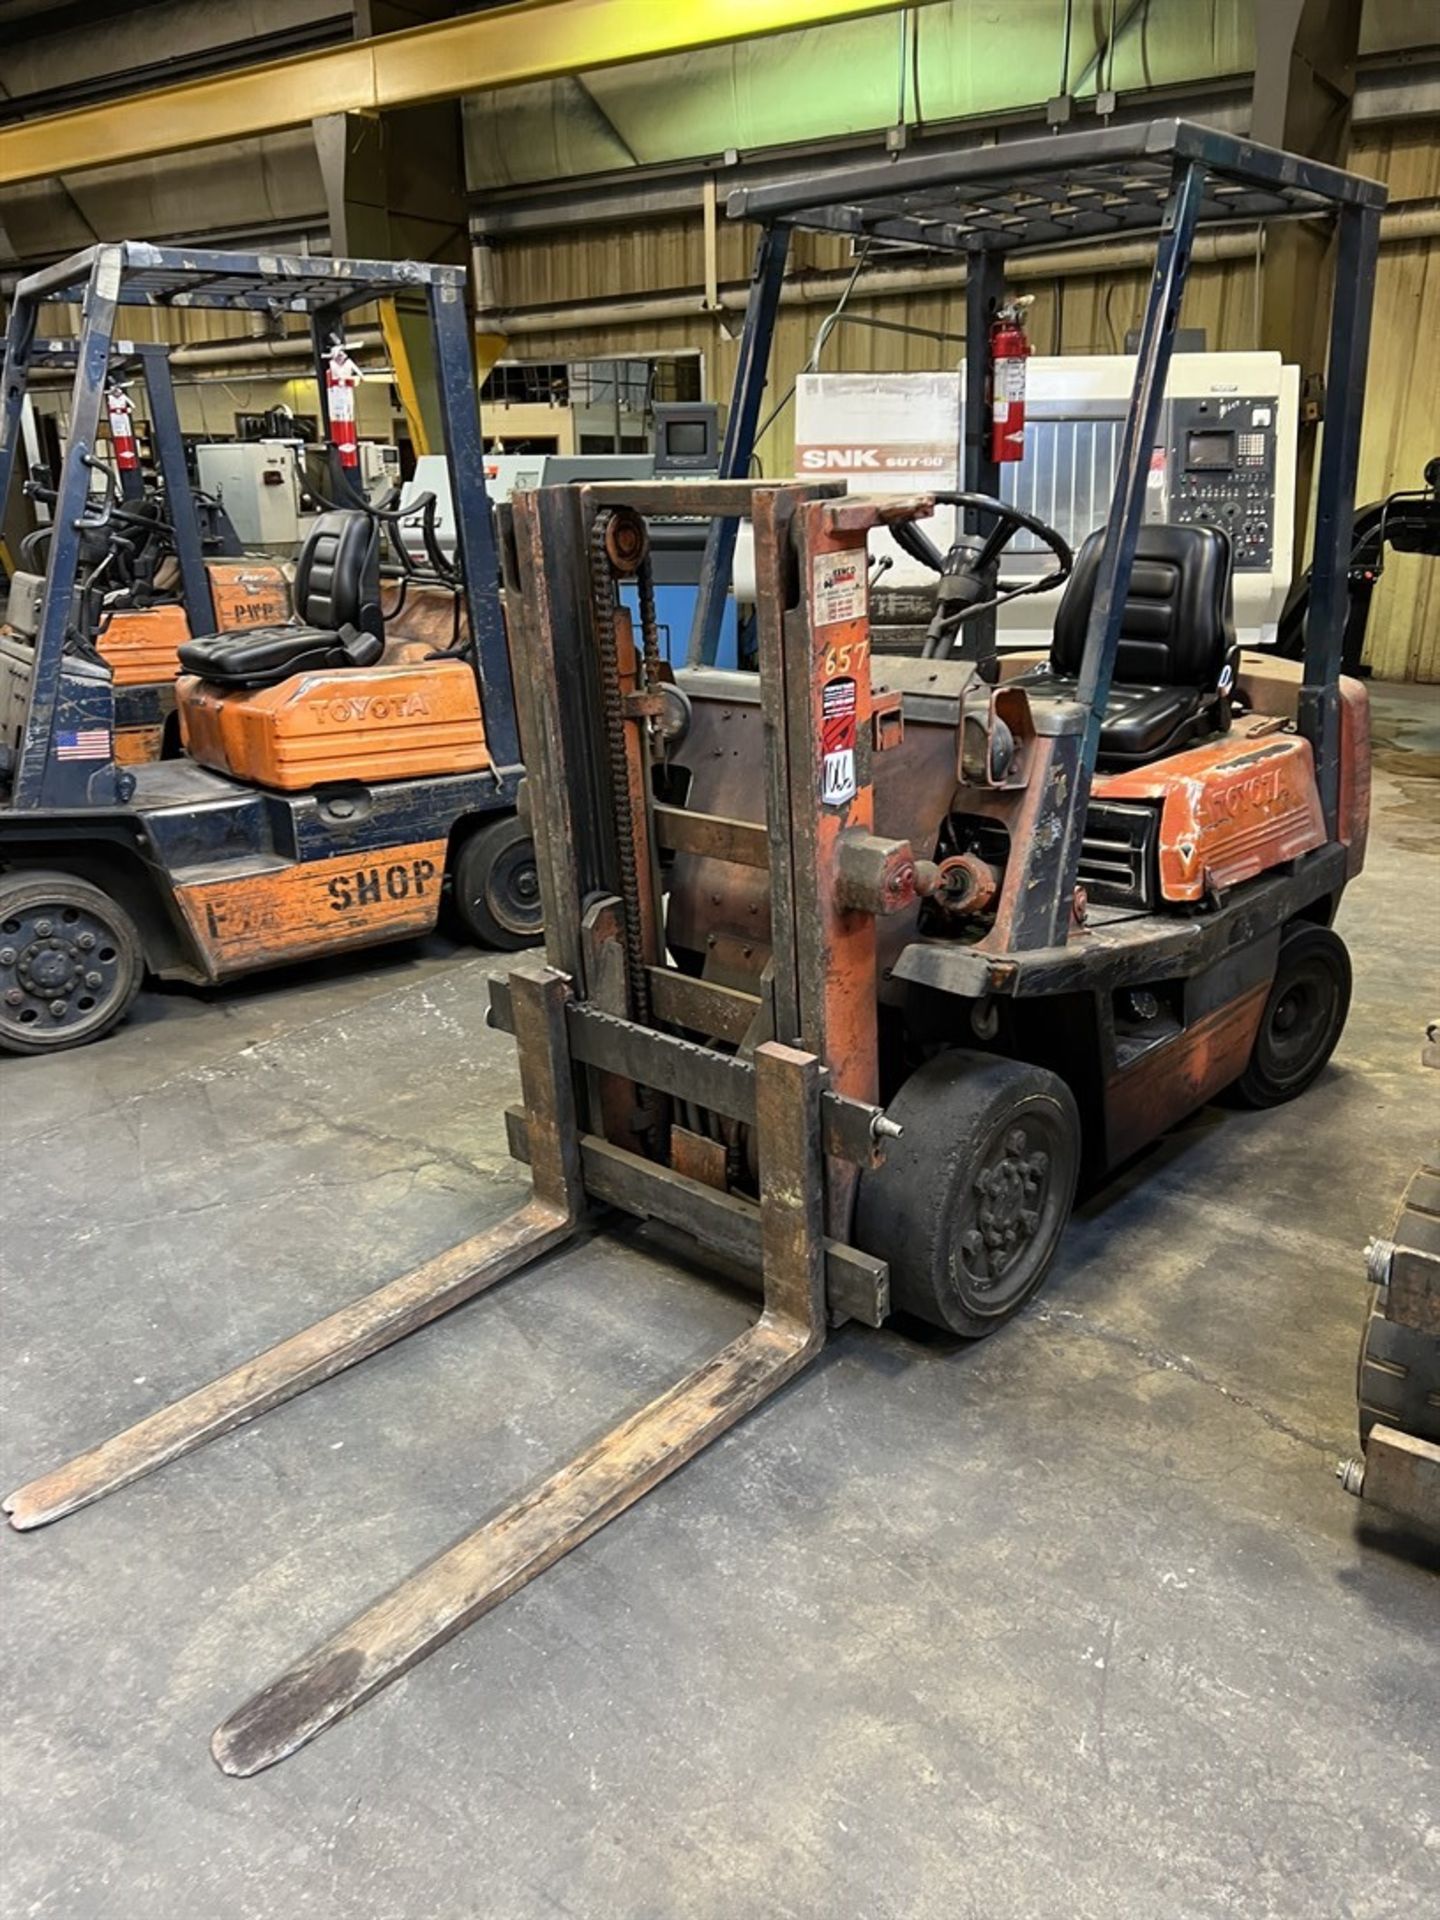 TOYOTA 02-2FDC20 Short Mast LP Forklift, s/n 2FDC25-12572, 4000 Lb Capacity, 2-Stage Mast, OH